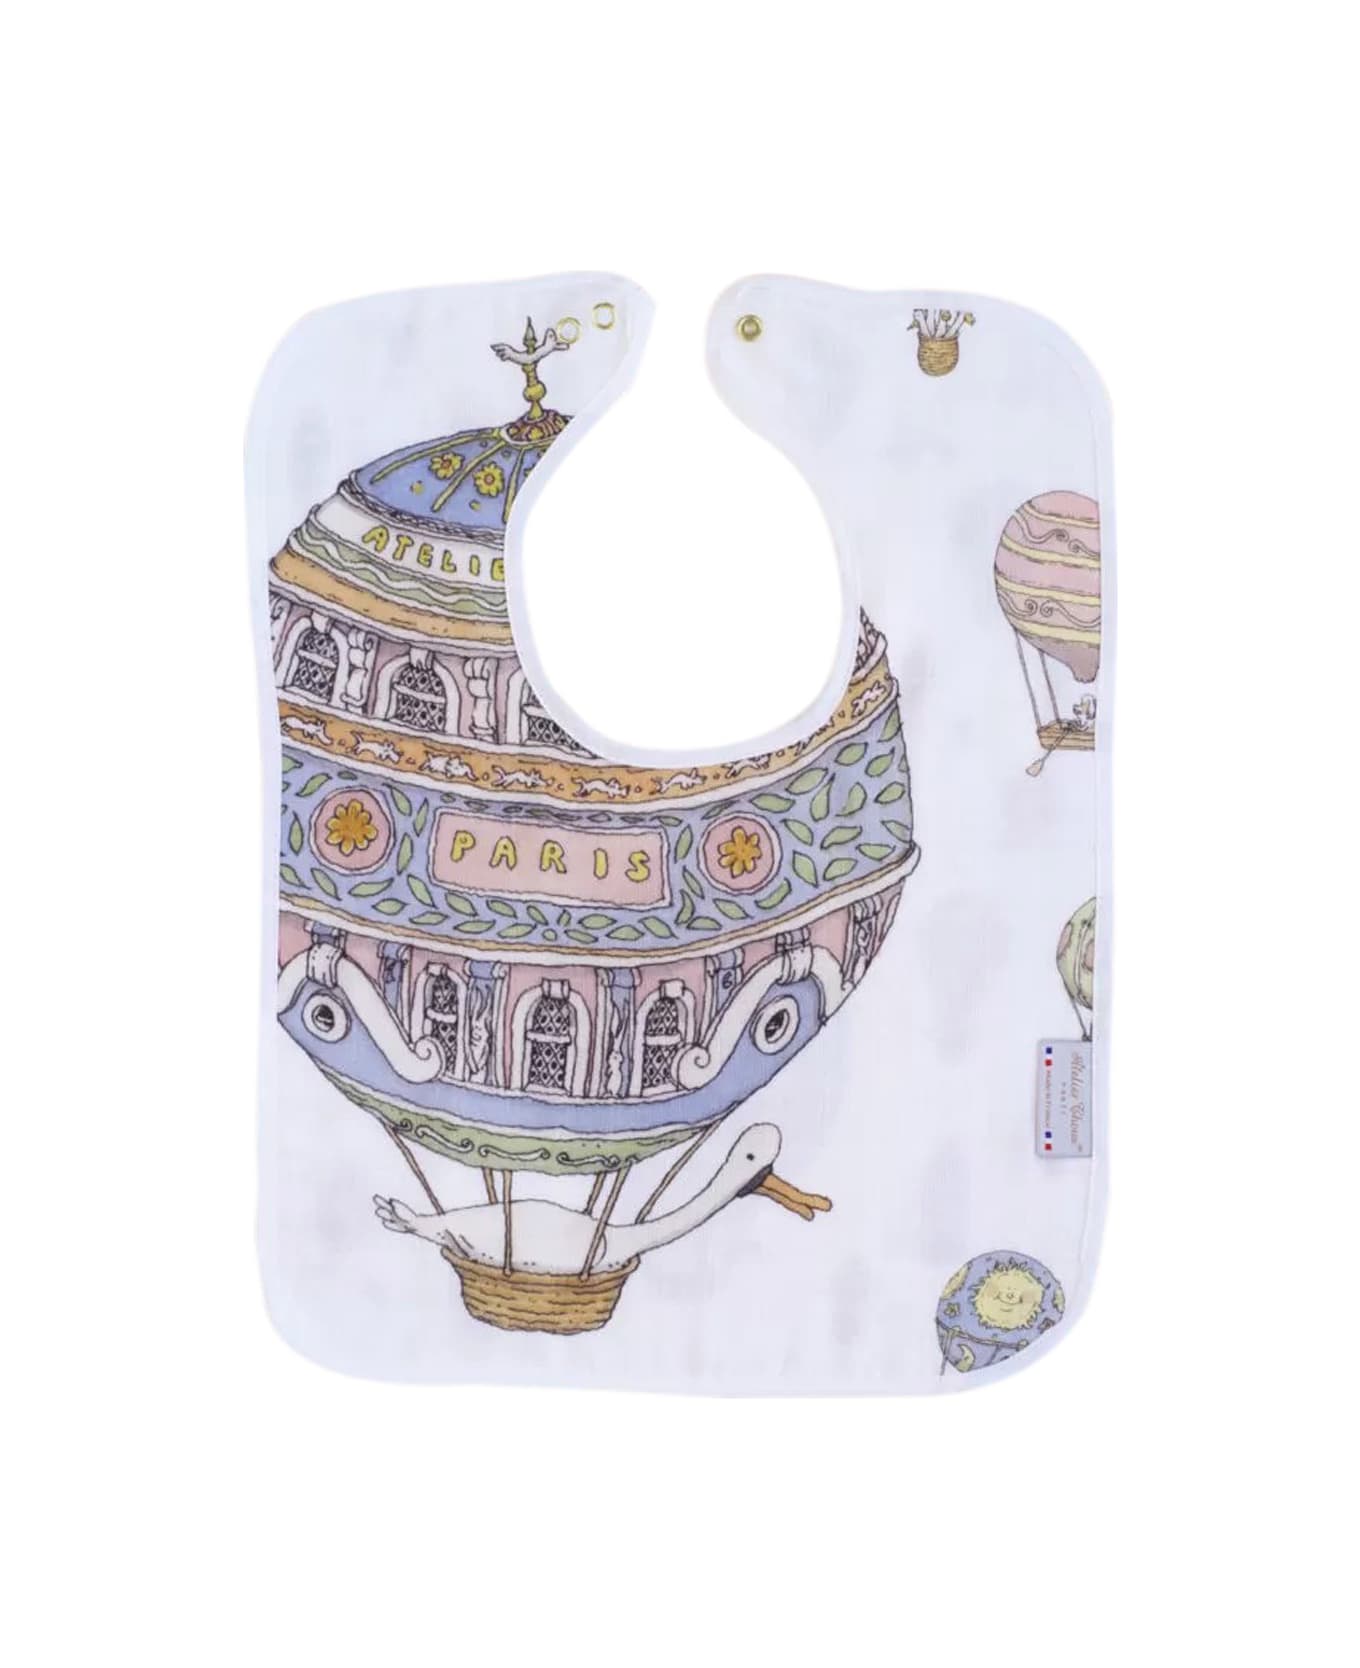 Atelier Choux Large Bib Hot Air Balloons Gold Snaps - Multicolor アクセサリー＆ギフト